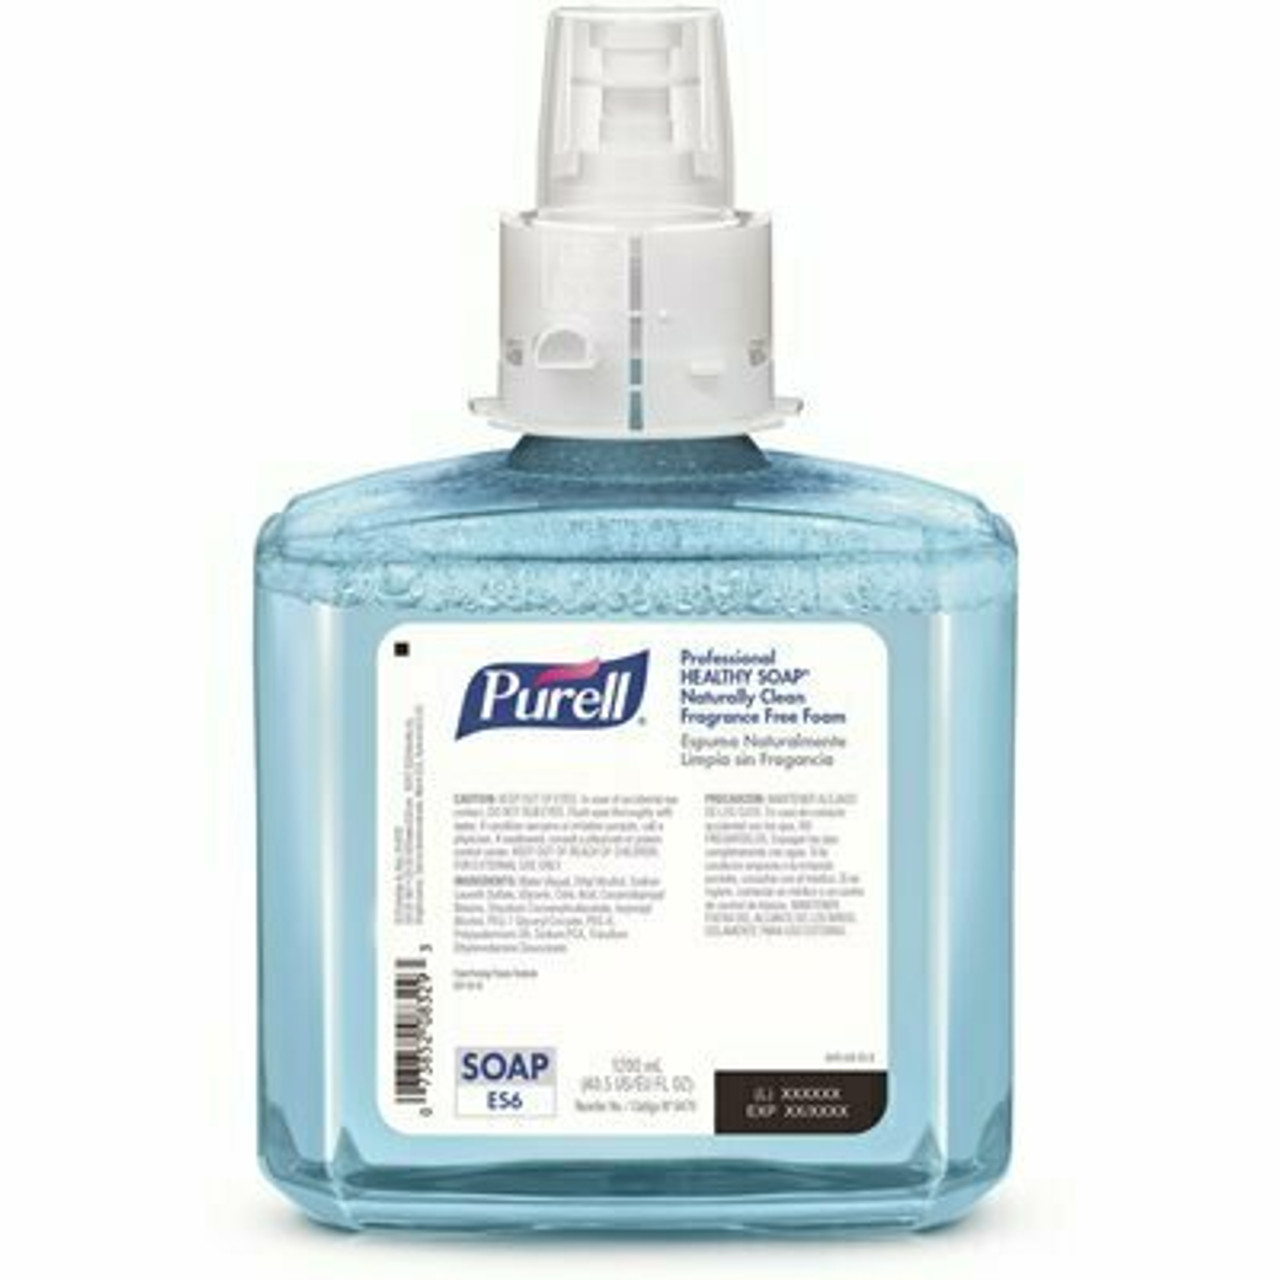 Purell Professional Crt Healthy Soap Naturally Clean Foam, Fragrance Free, Ecologo Certified, 1200 Ml Foam Refill (Pack Of 2)